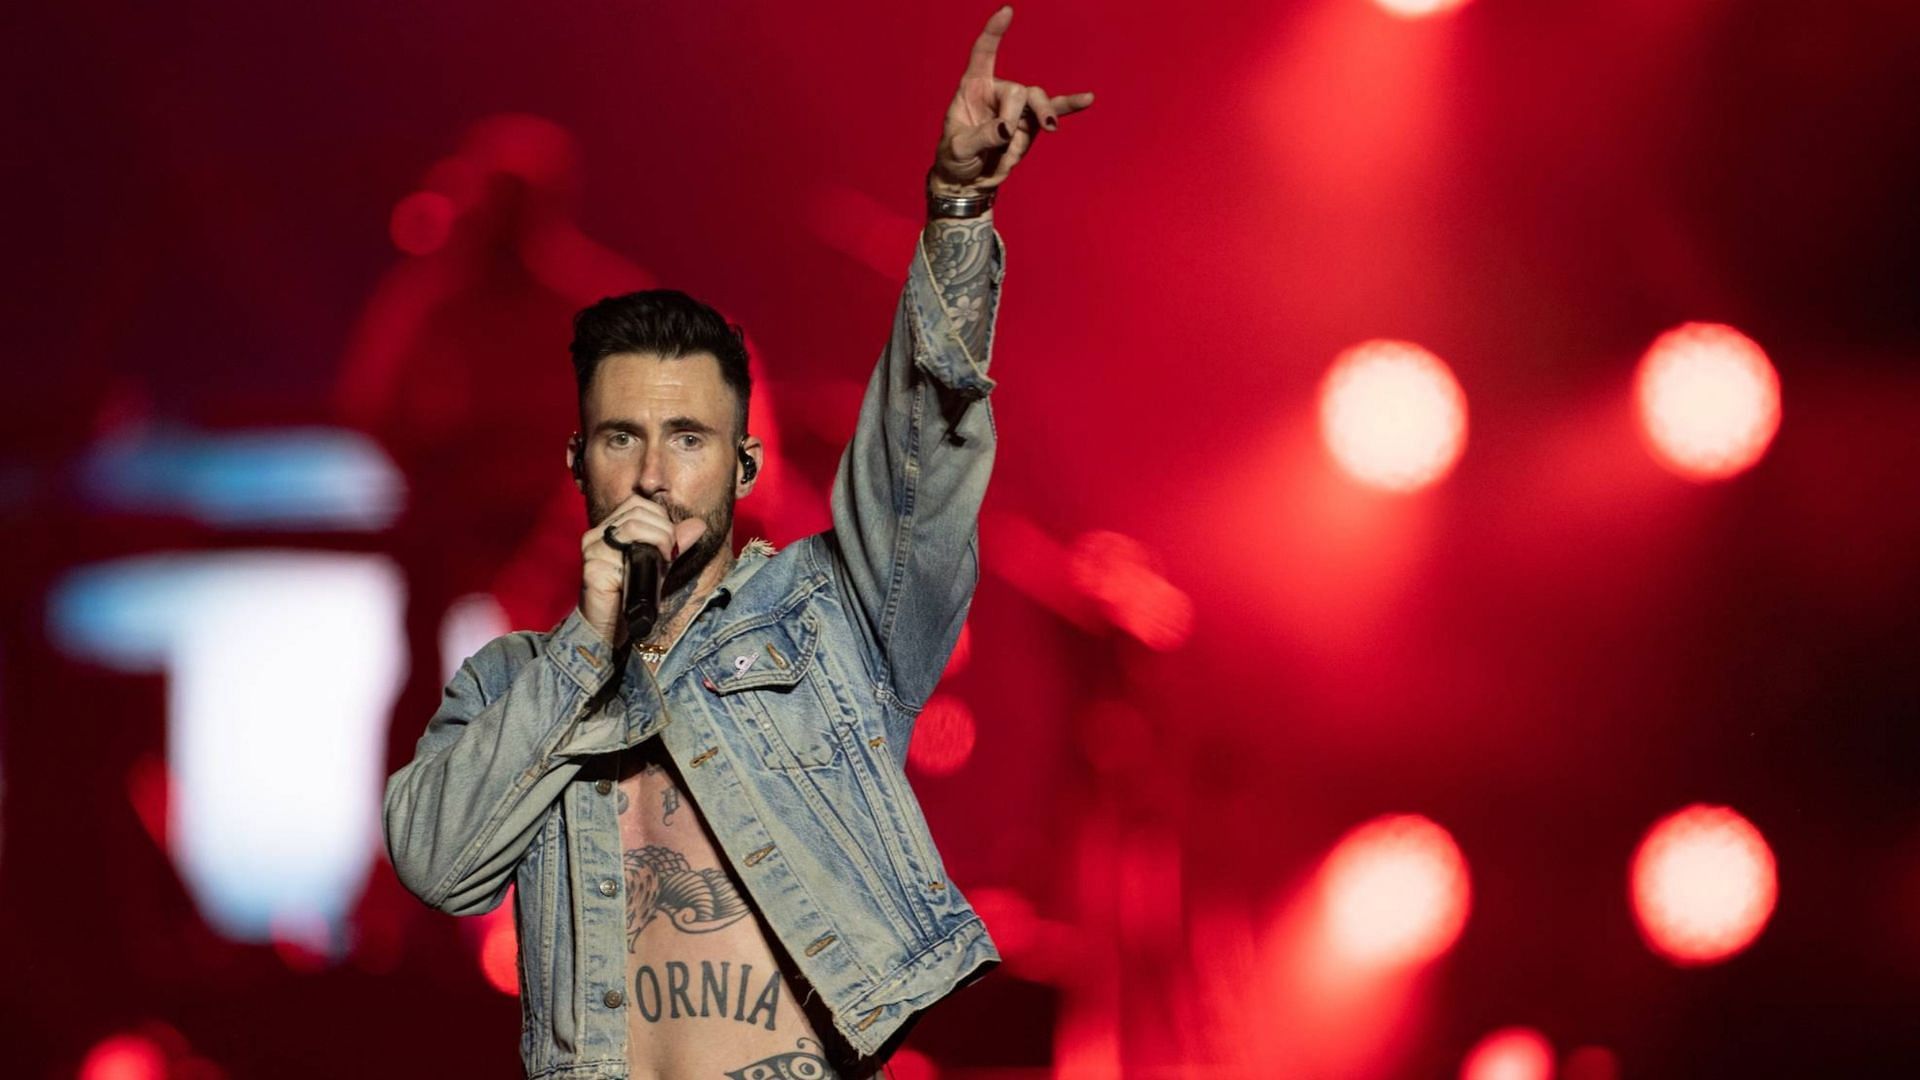 Maroon 5 has announced tour dates scheduled for UK and Europe. (Image via Shlomi Pinto / Getty)